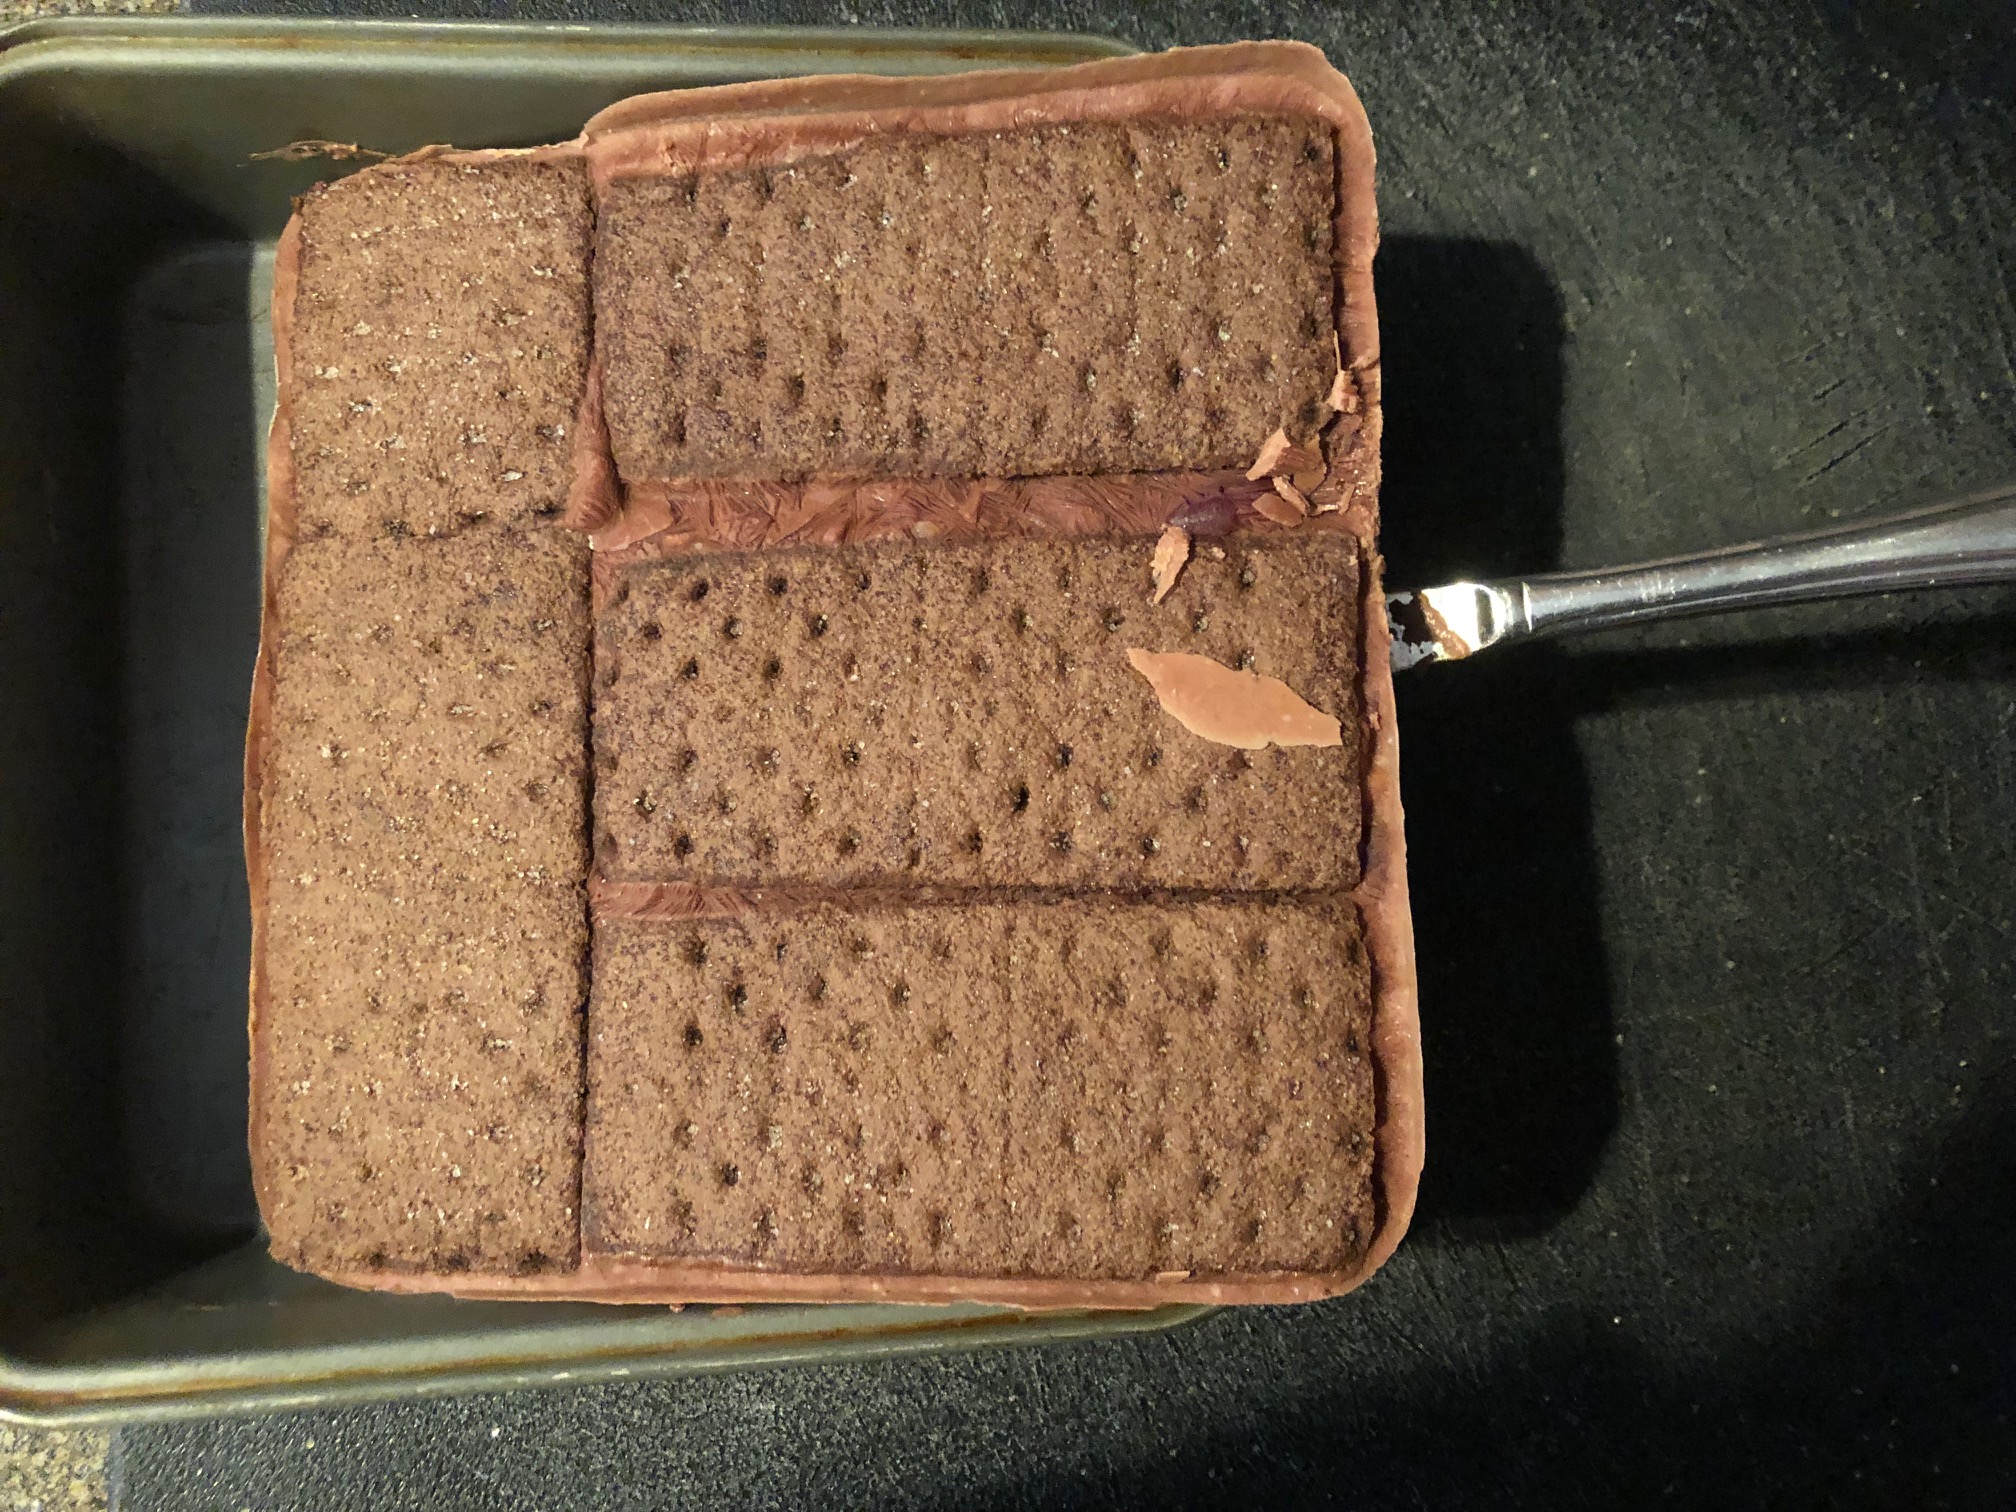 ice cream sandwiches being lifted out of pan